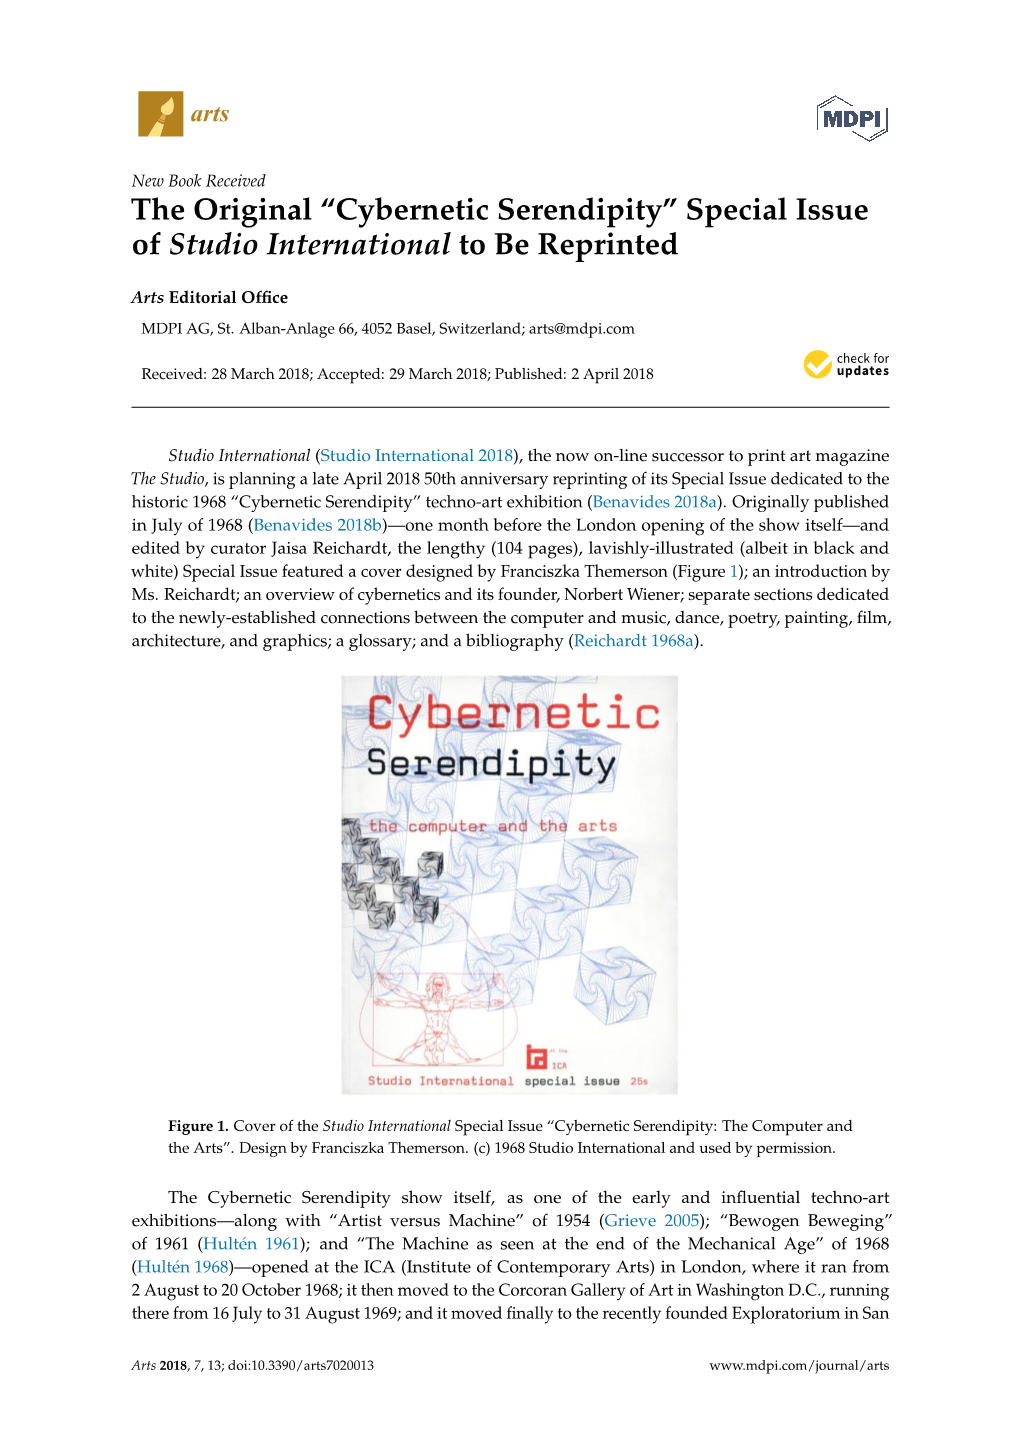 Cybernetic Serendipity” Special Issue of Studio International to Be Reprinted